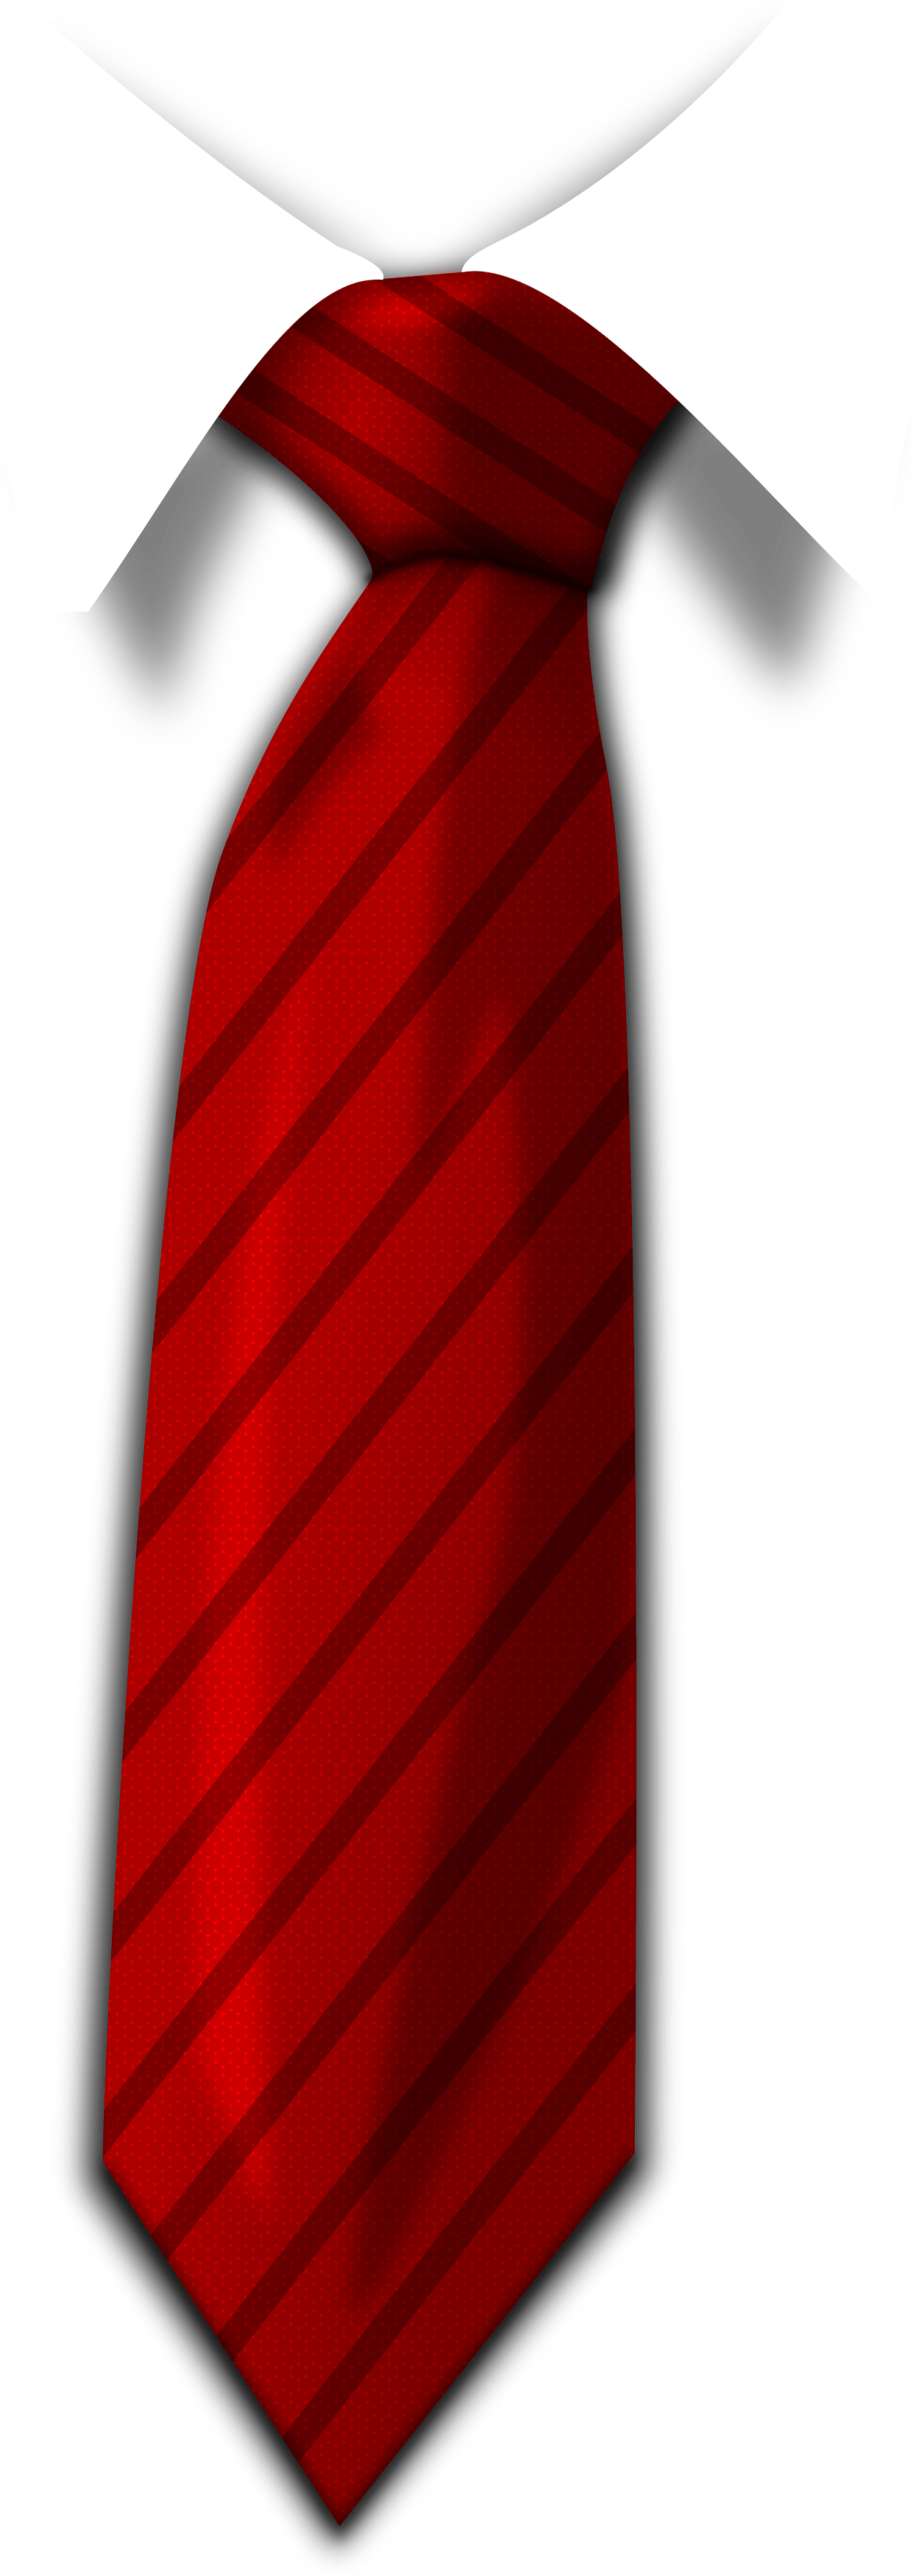 Download Png Image   Red Tie Png Image - Tie, Transparent background PNG HD thumbnail